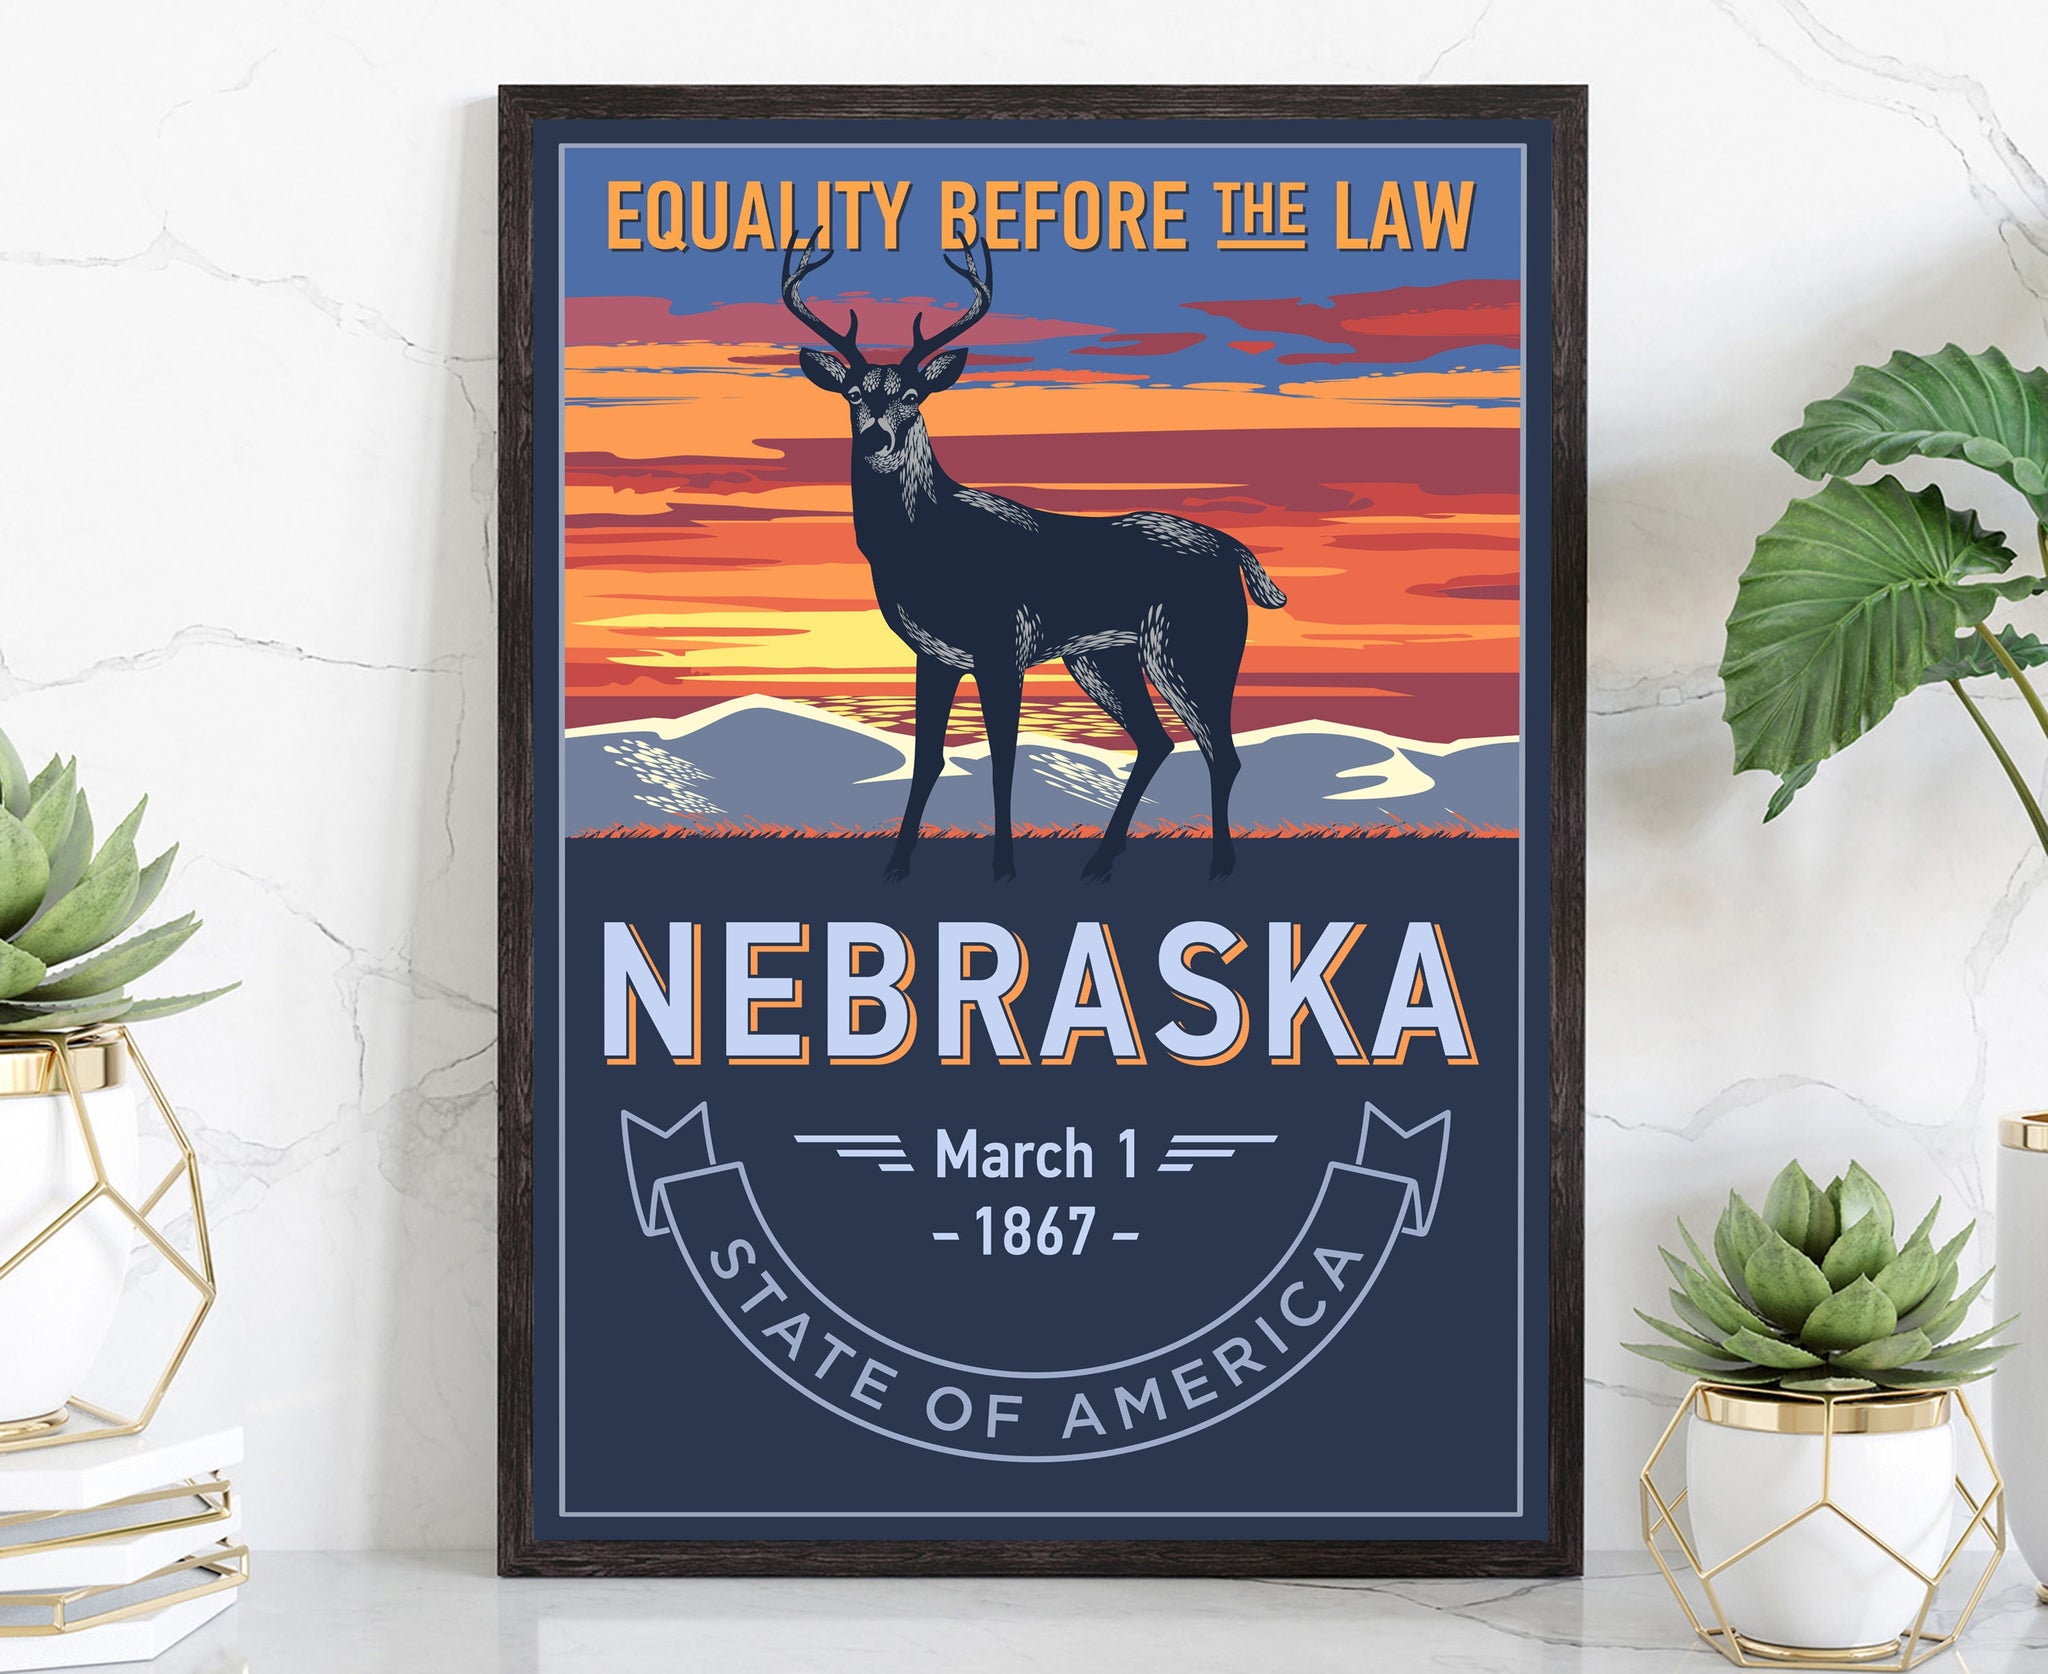 United States Poster, Nebraska State Poster Print, Nebraska State Emblem Poster, Retro Travel State Poster, Home and Office Wall Art